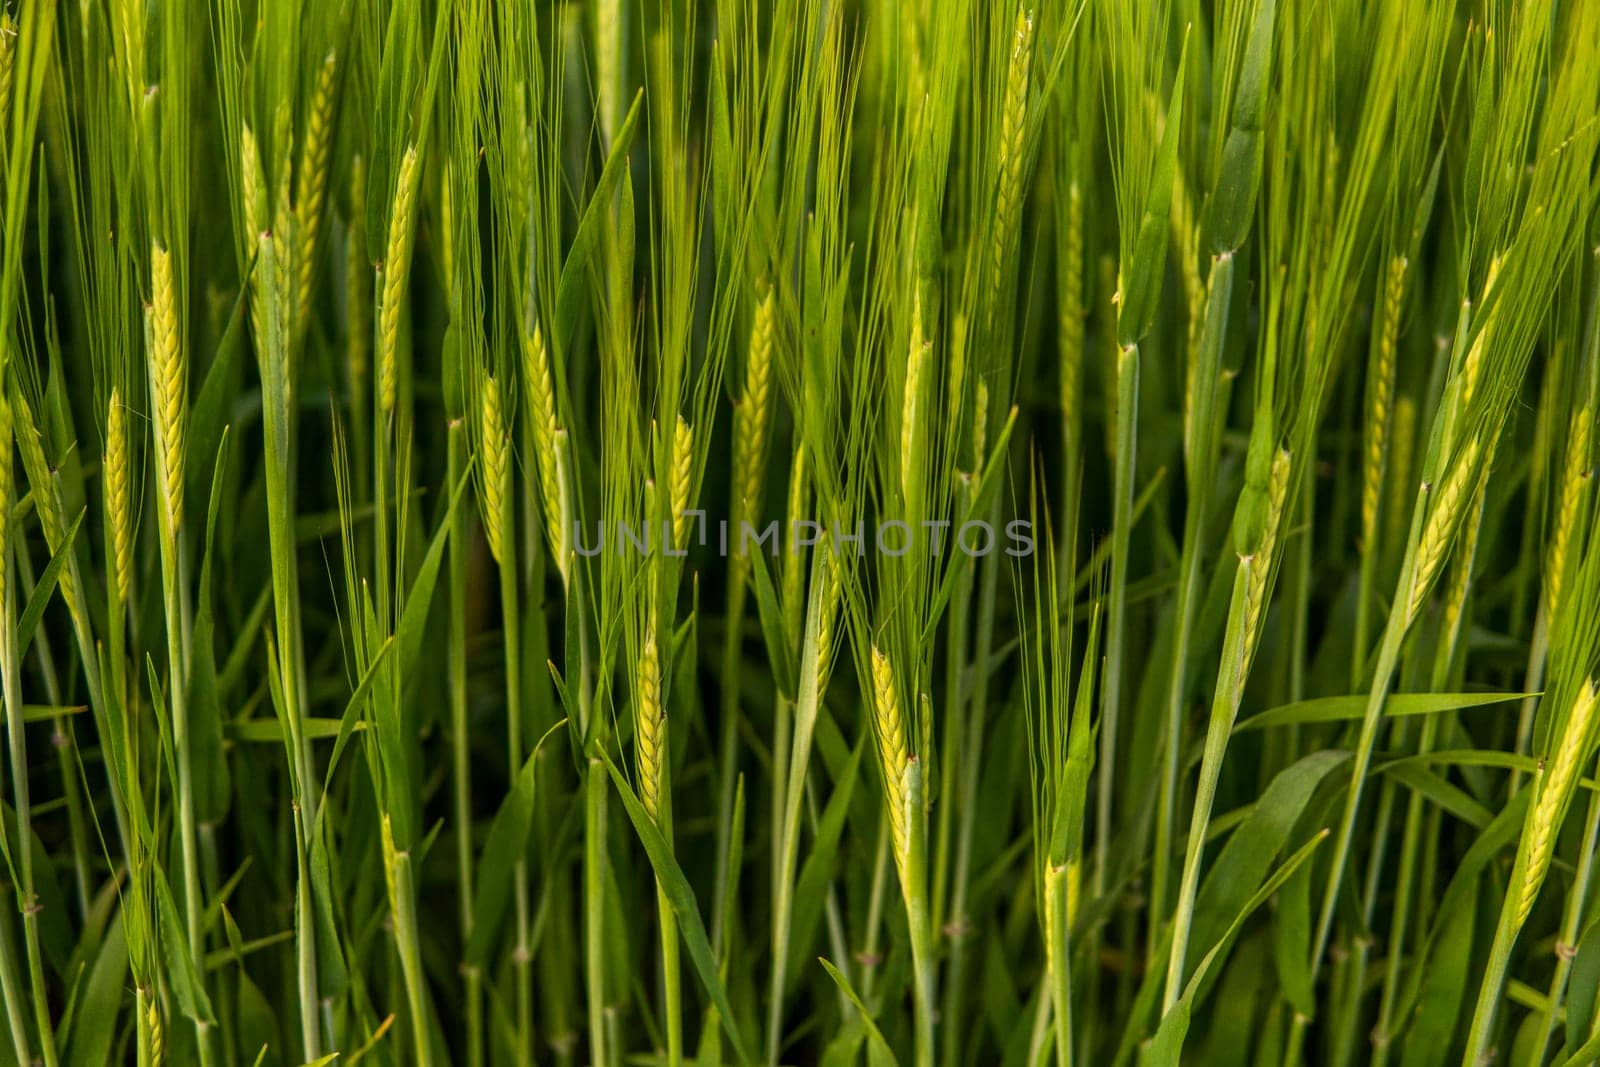 Rich harvest concept. Agriculture. Close up of juicy fresh ears of young green barley on nature in summer field with a blue sky. Background of ripening ears of barley field